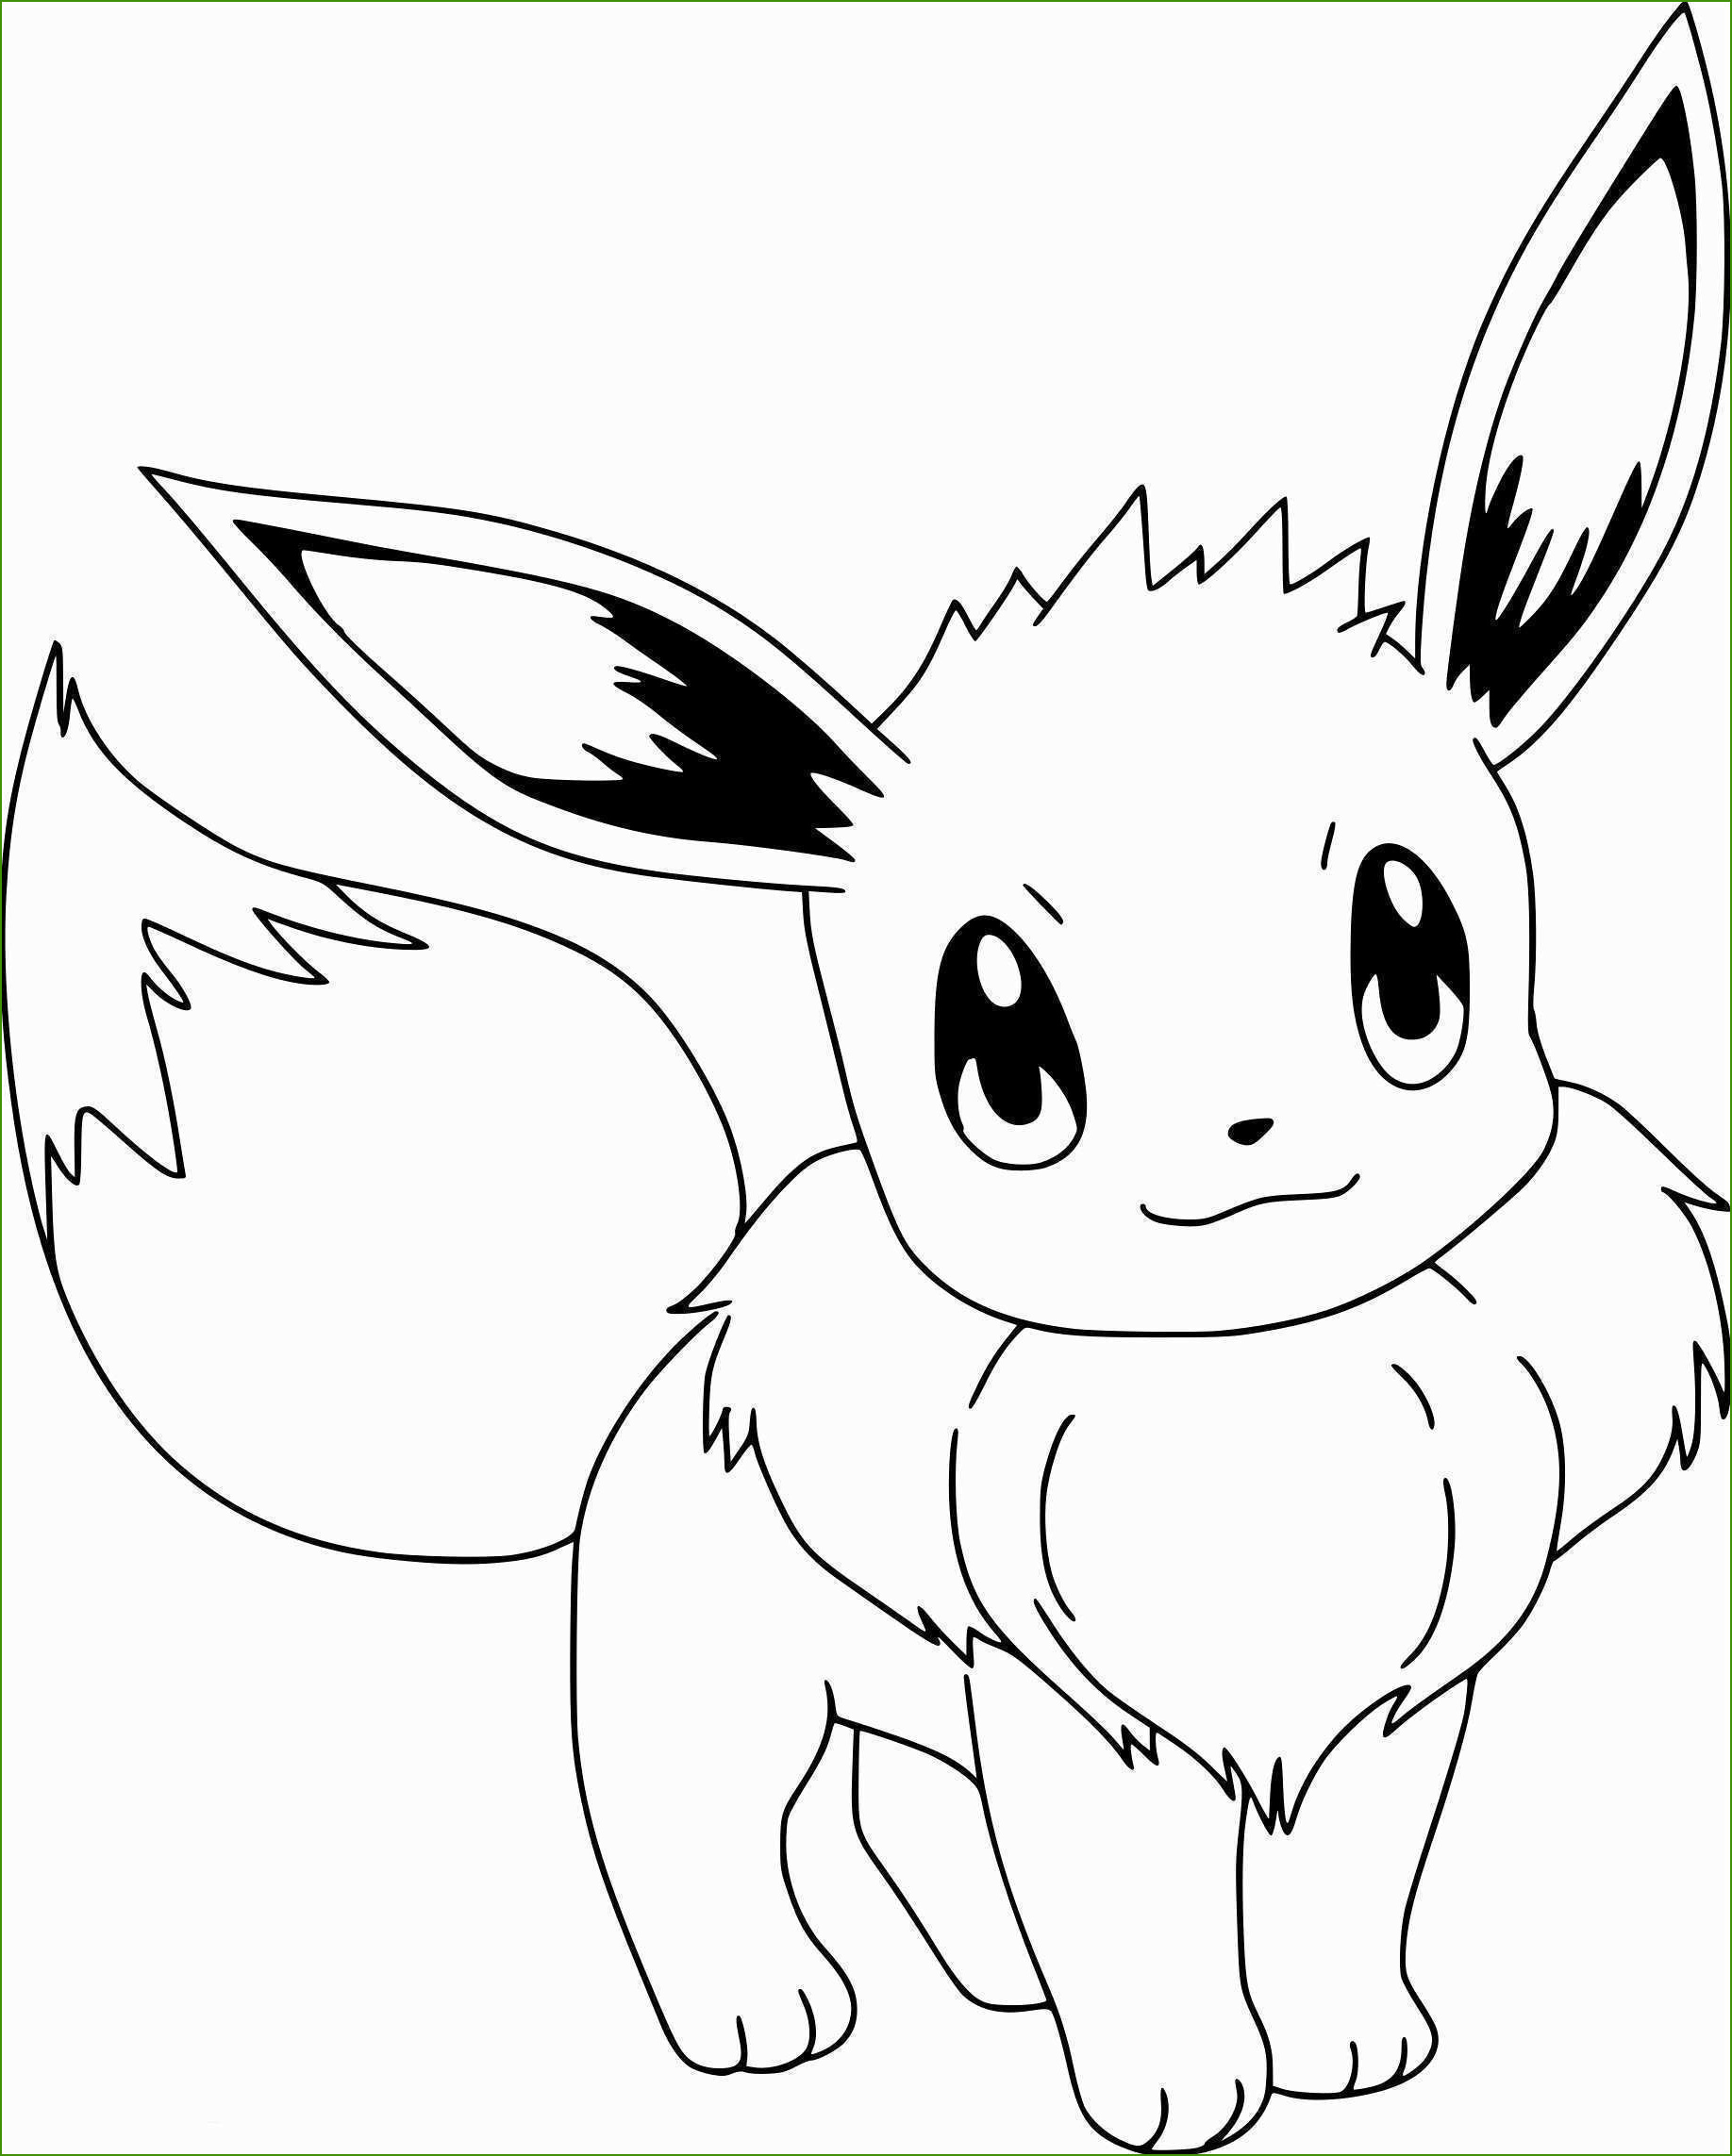 Coloriage Pokemon Ultra Lune Beau Collection Coloriage Pokemon Ultra soleil Et Ultra Lune Autre 35